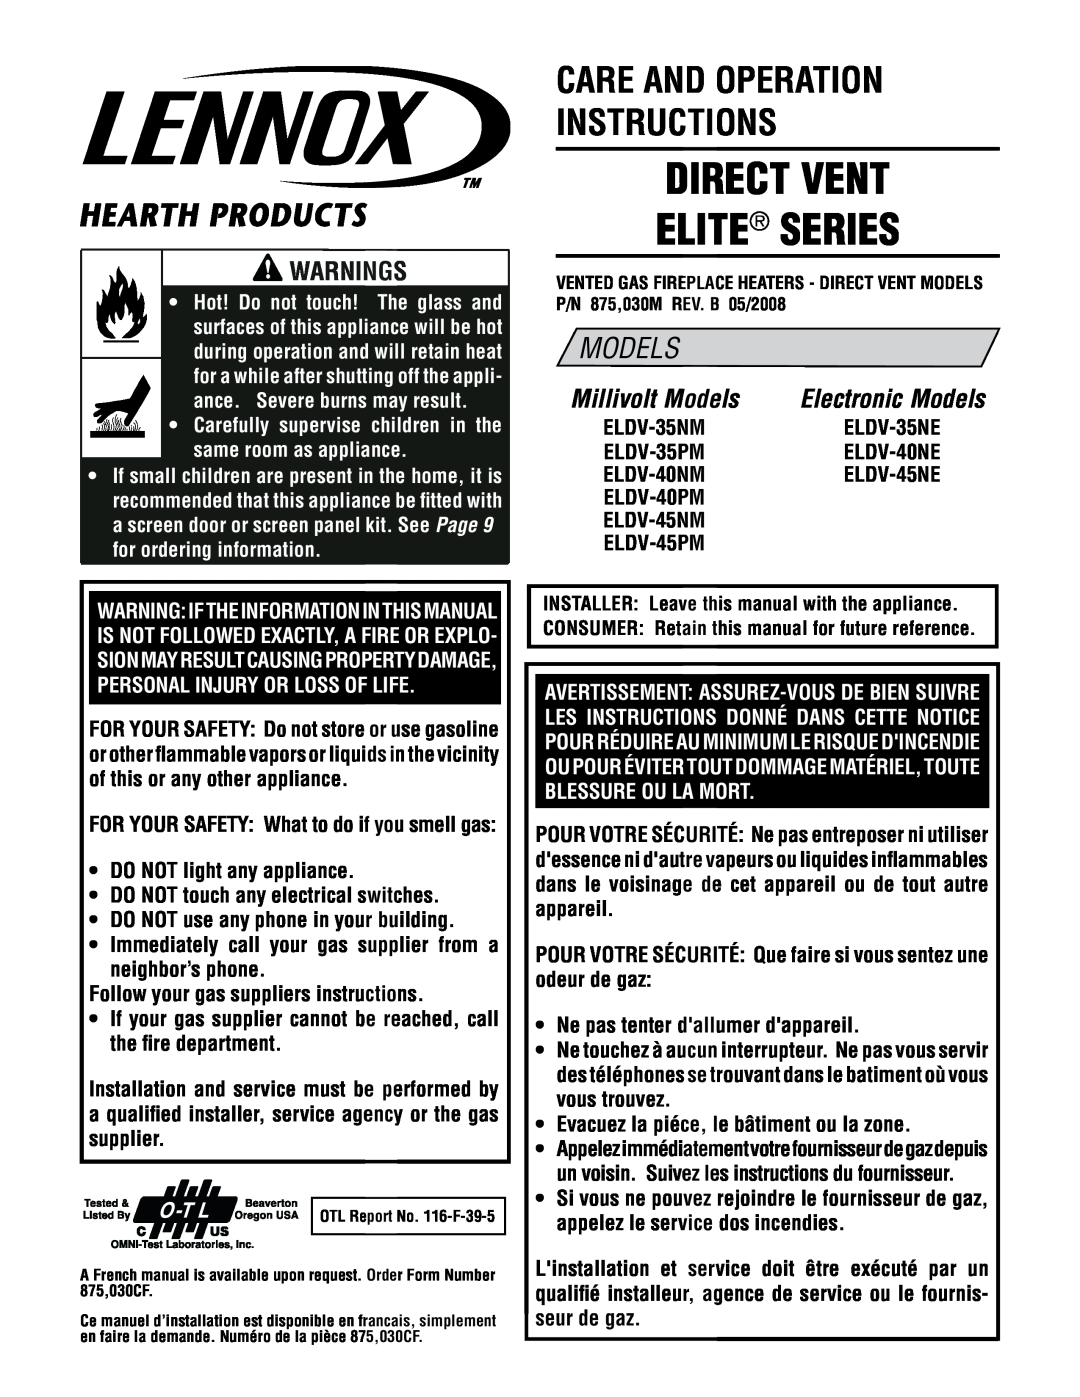 Lennox Hearth MP53-VDLE, MN04-VDLE manual Direct Vent Elite Series, care and operation instructions, Models, Warnings 